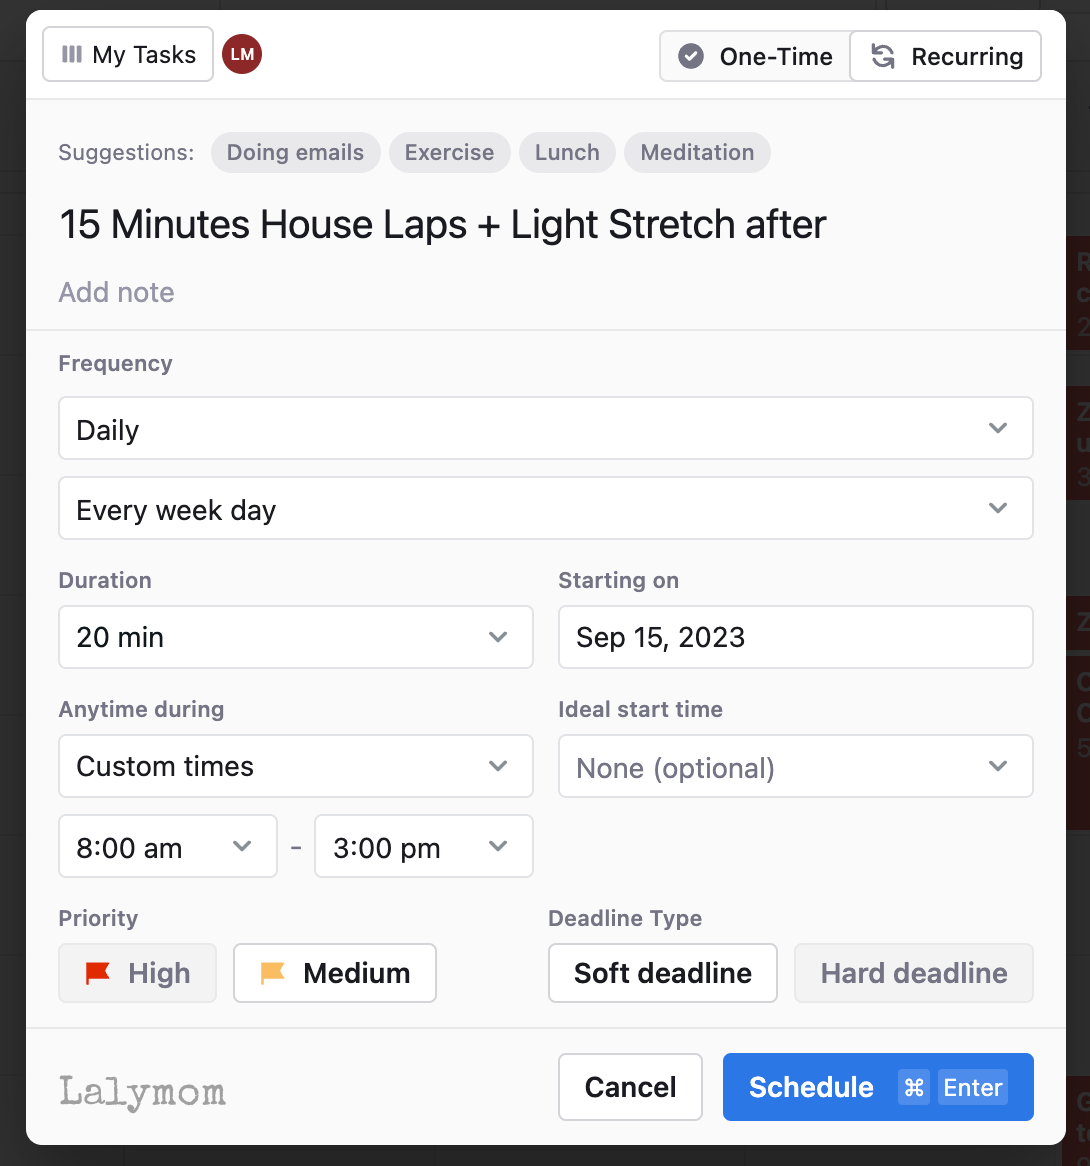 Screenshot of Motion AI Assistant, entering a task reminder called 15 Minutes House Laps + Light Stretch after.